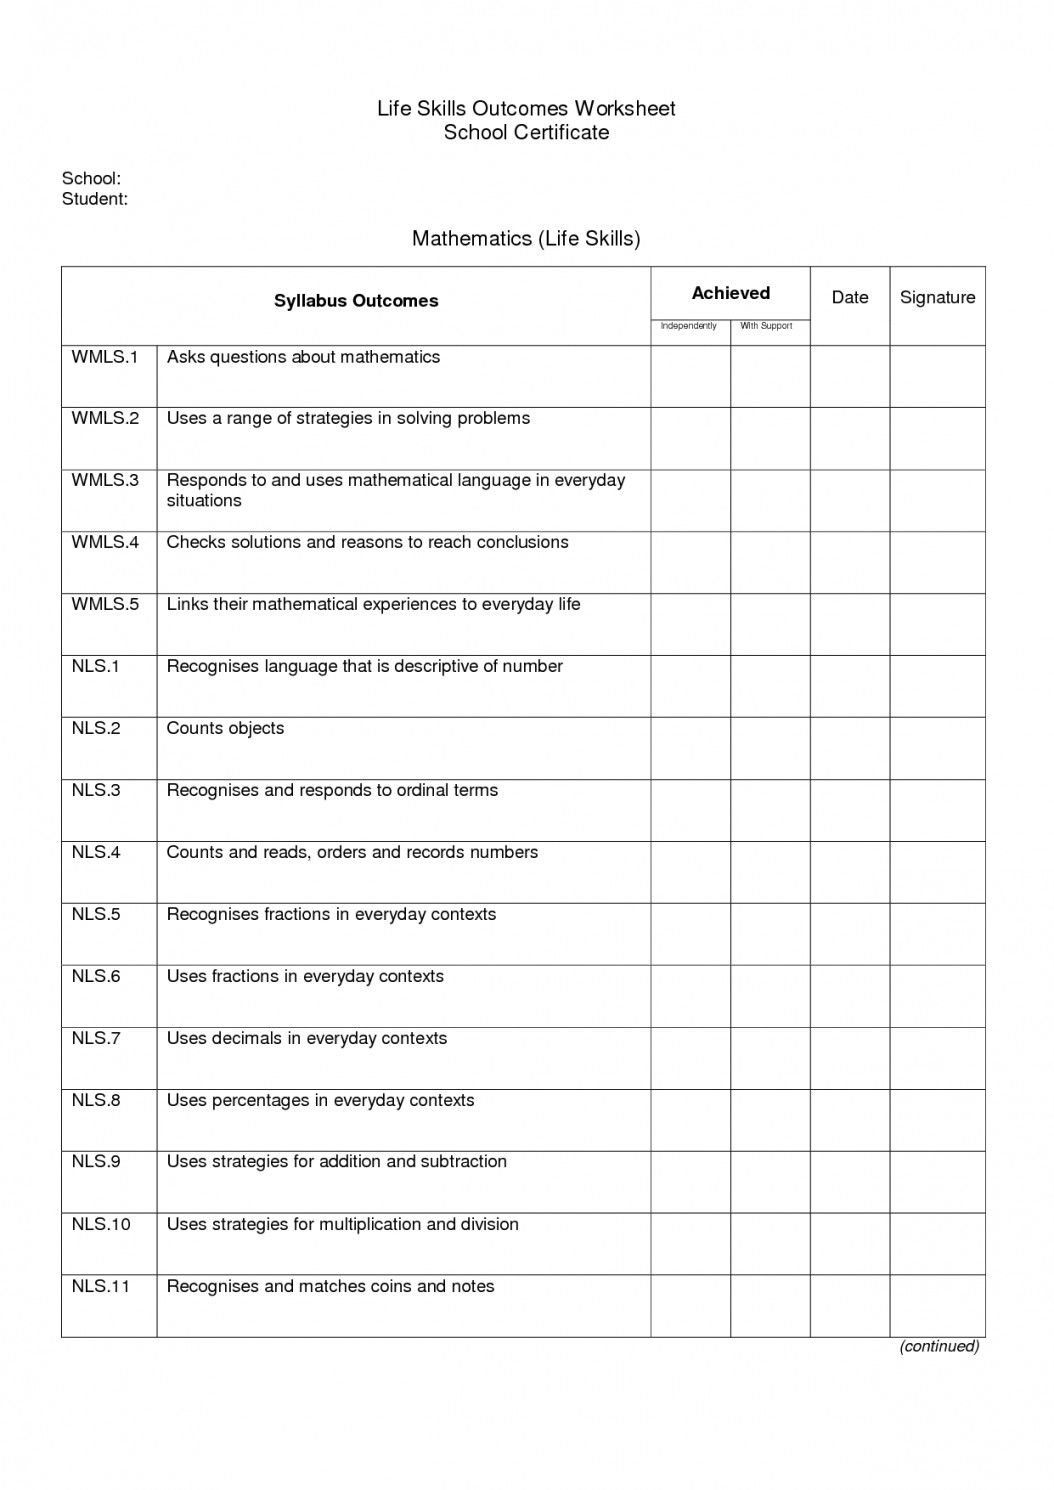 Free Life Skills Worksheets Printable For Highschool Students Grade - Free Printable Life Skills Worksheets For Adults